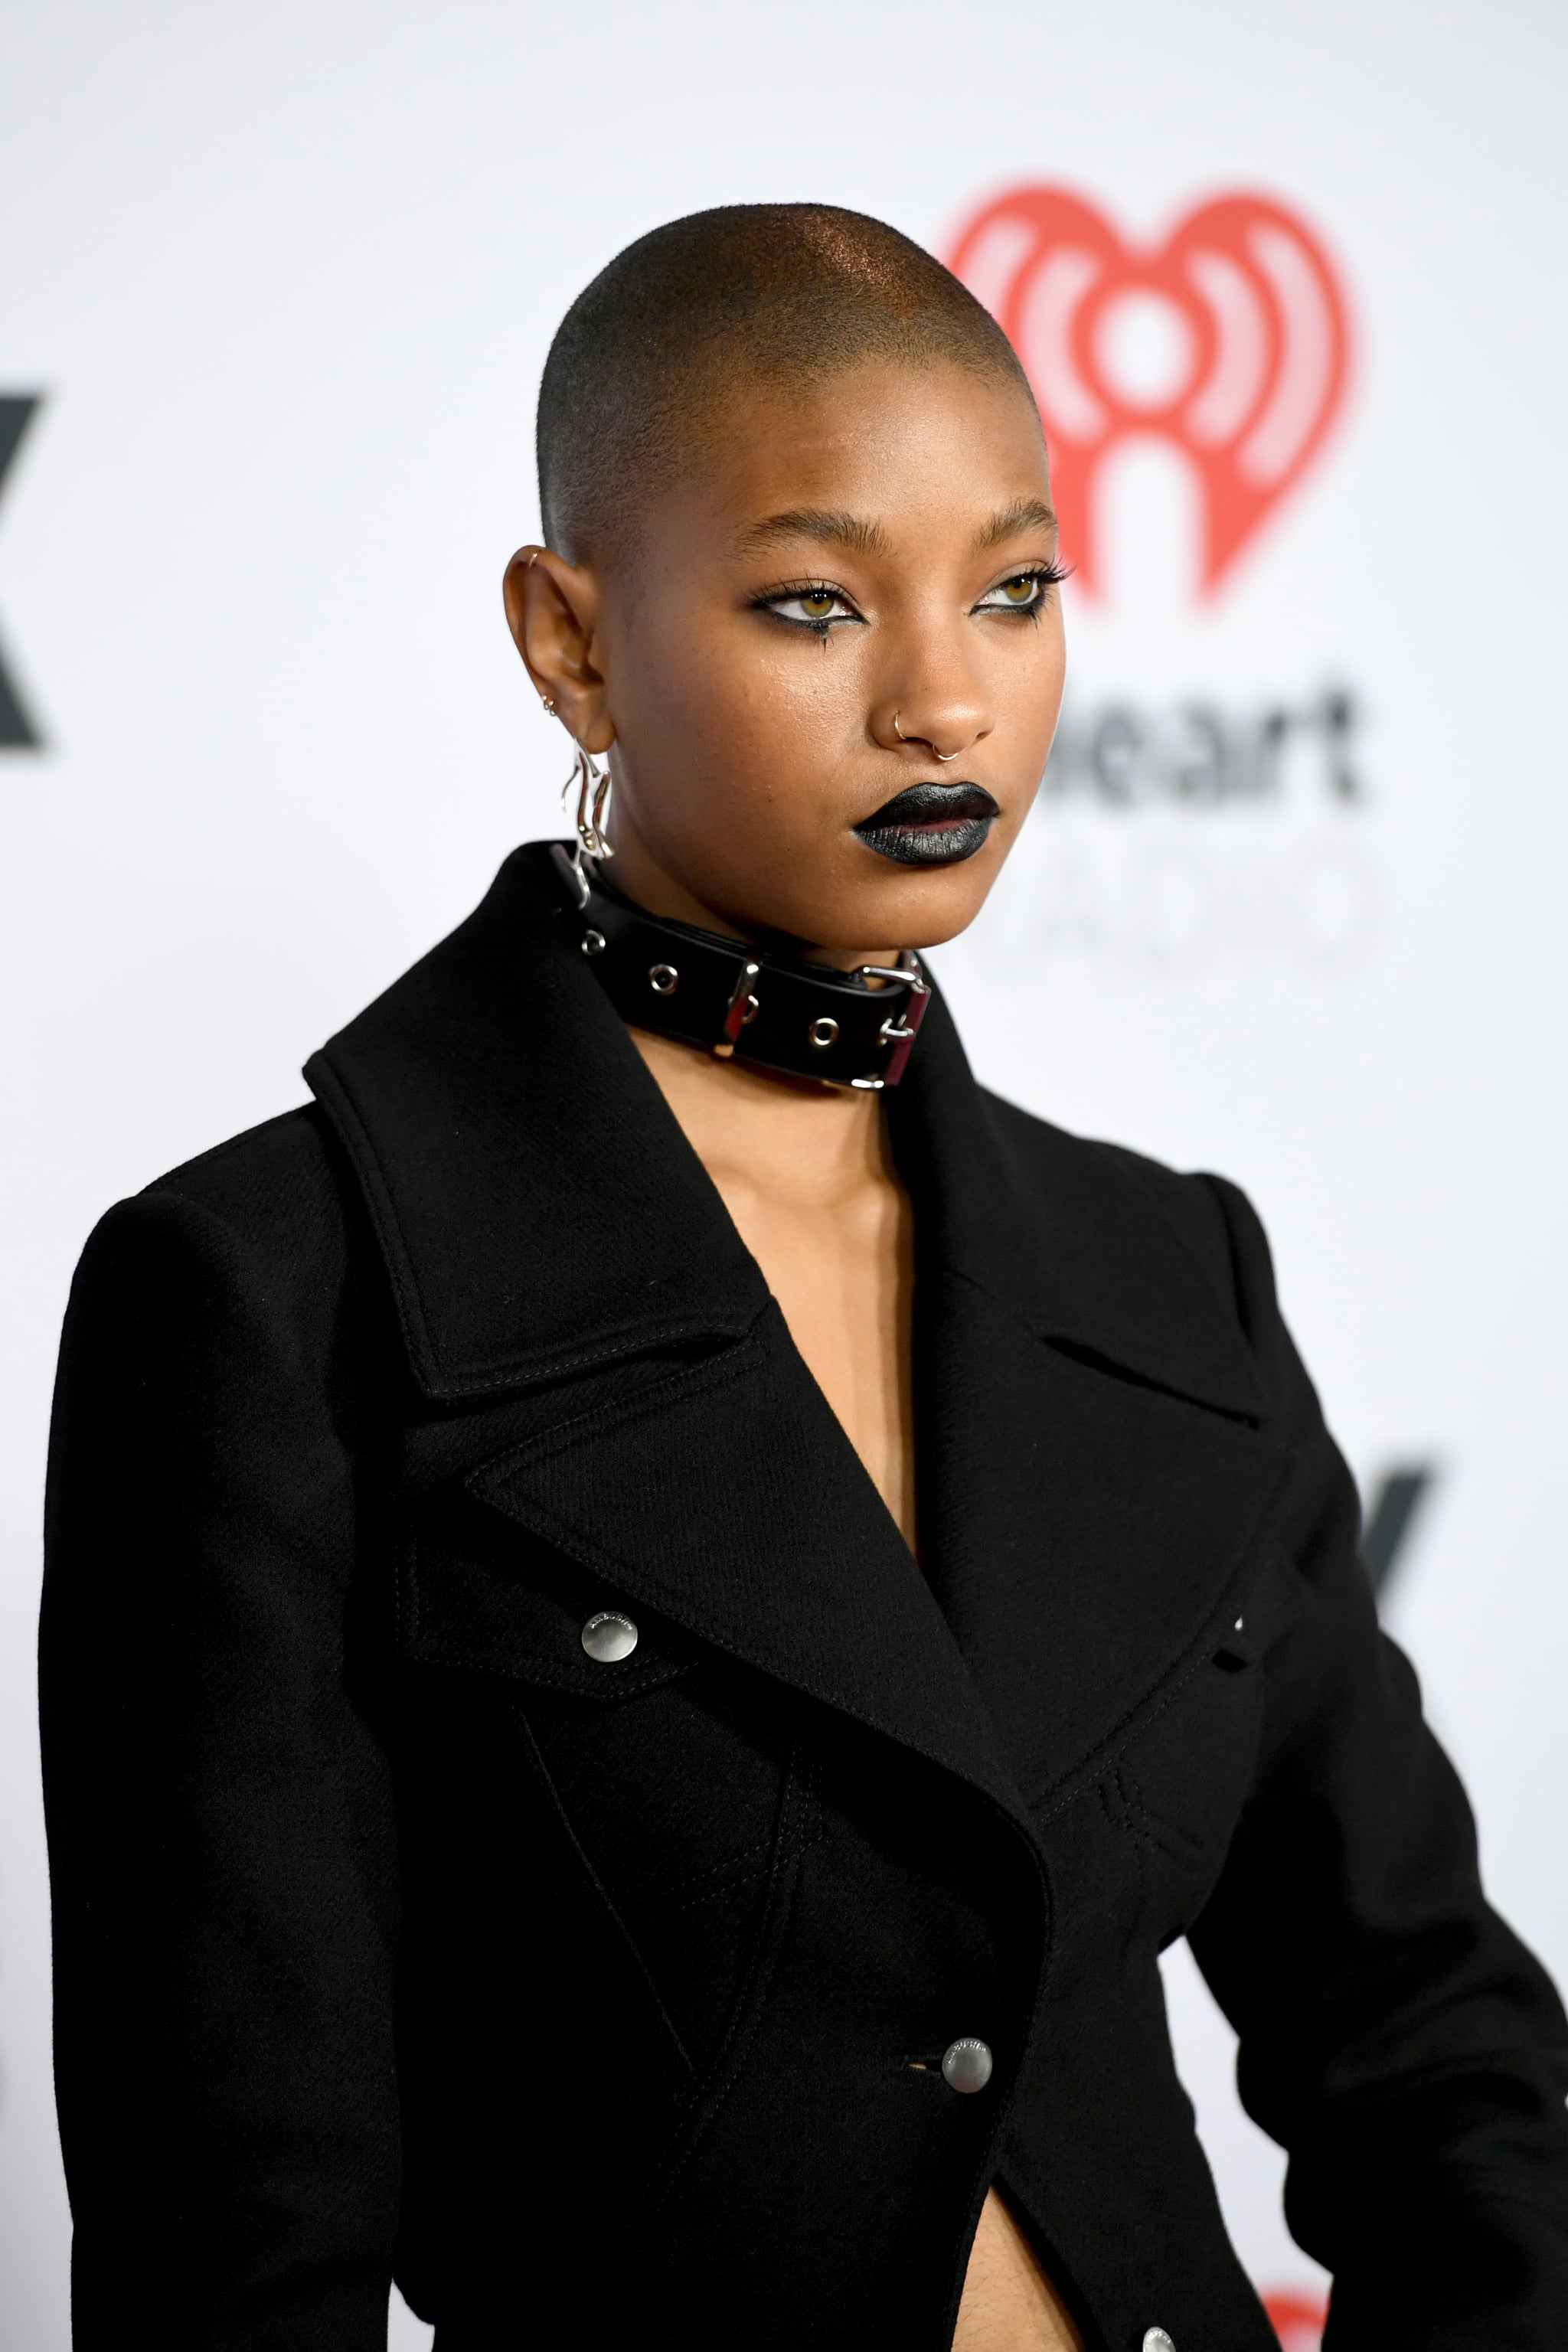 LOS ANGELES, CALIFORNIA - MARCH 22: (FOR EDITORIAL USE ONLY) Willow Smith attends the 2022 iHeartRadio Music Awards at The Shrine Auditorium in Los Angeles, California on March 22, 2022. Broadcasted live on FOX. (Photo by JC Olivera/Getty Images for iHeartRadio)